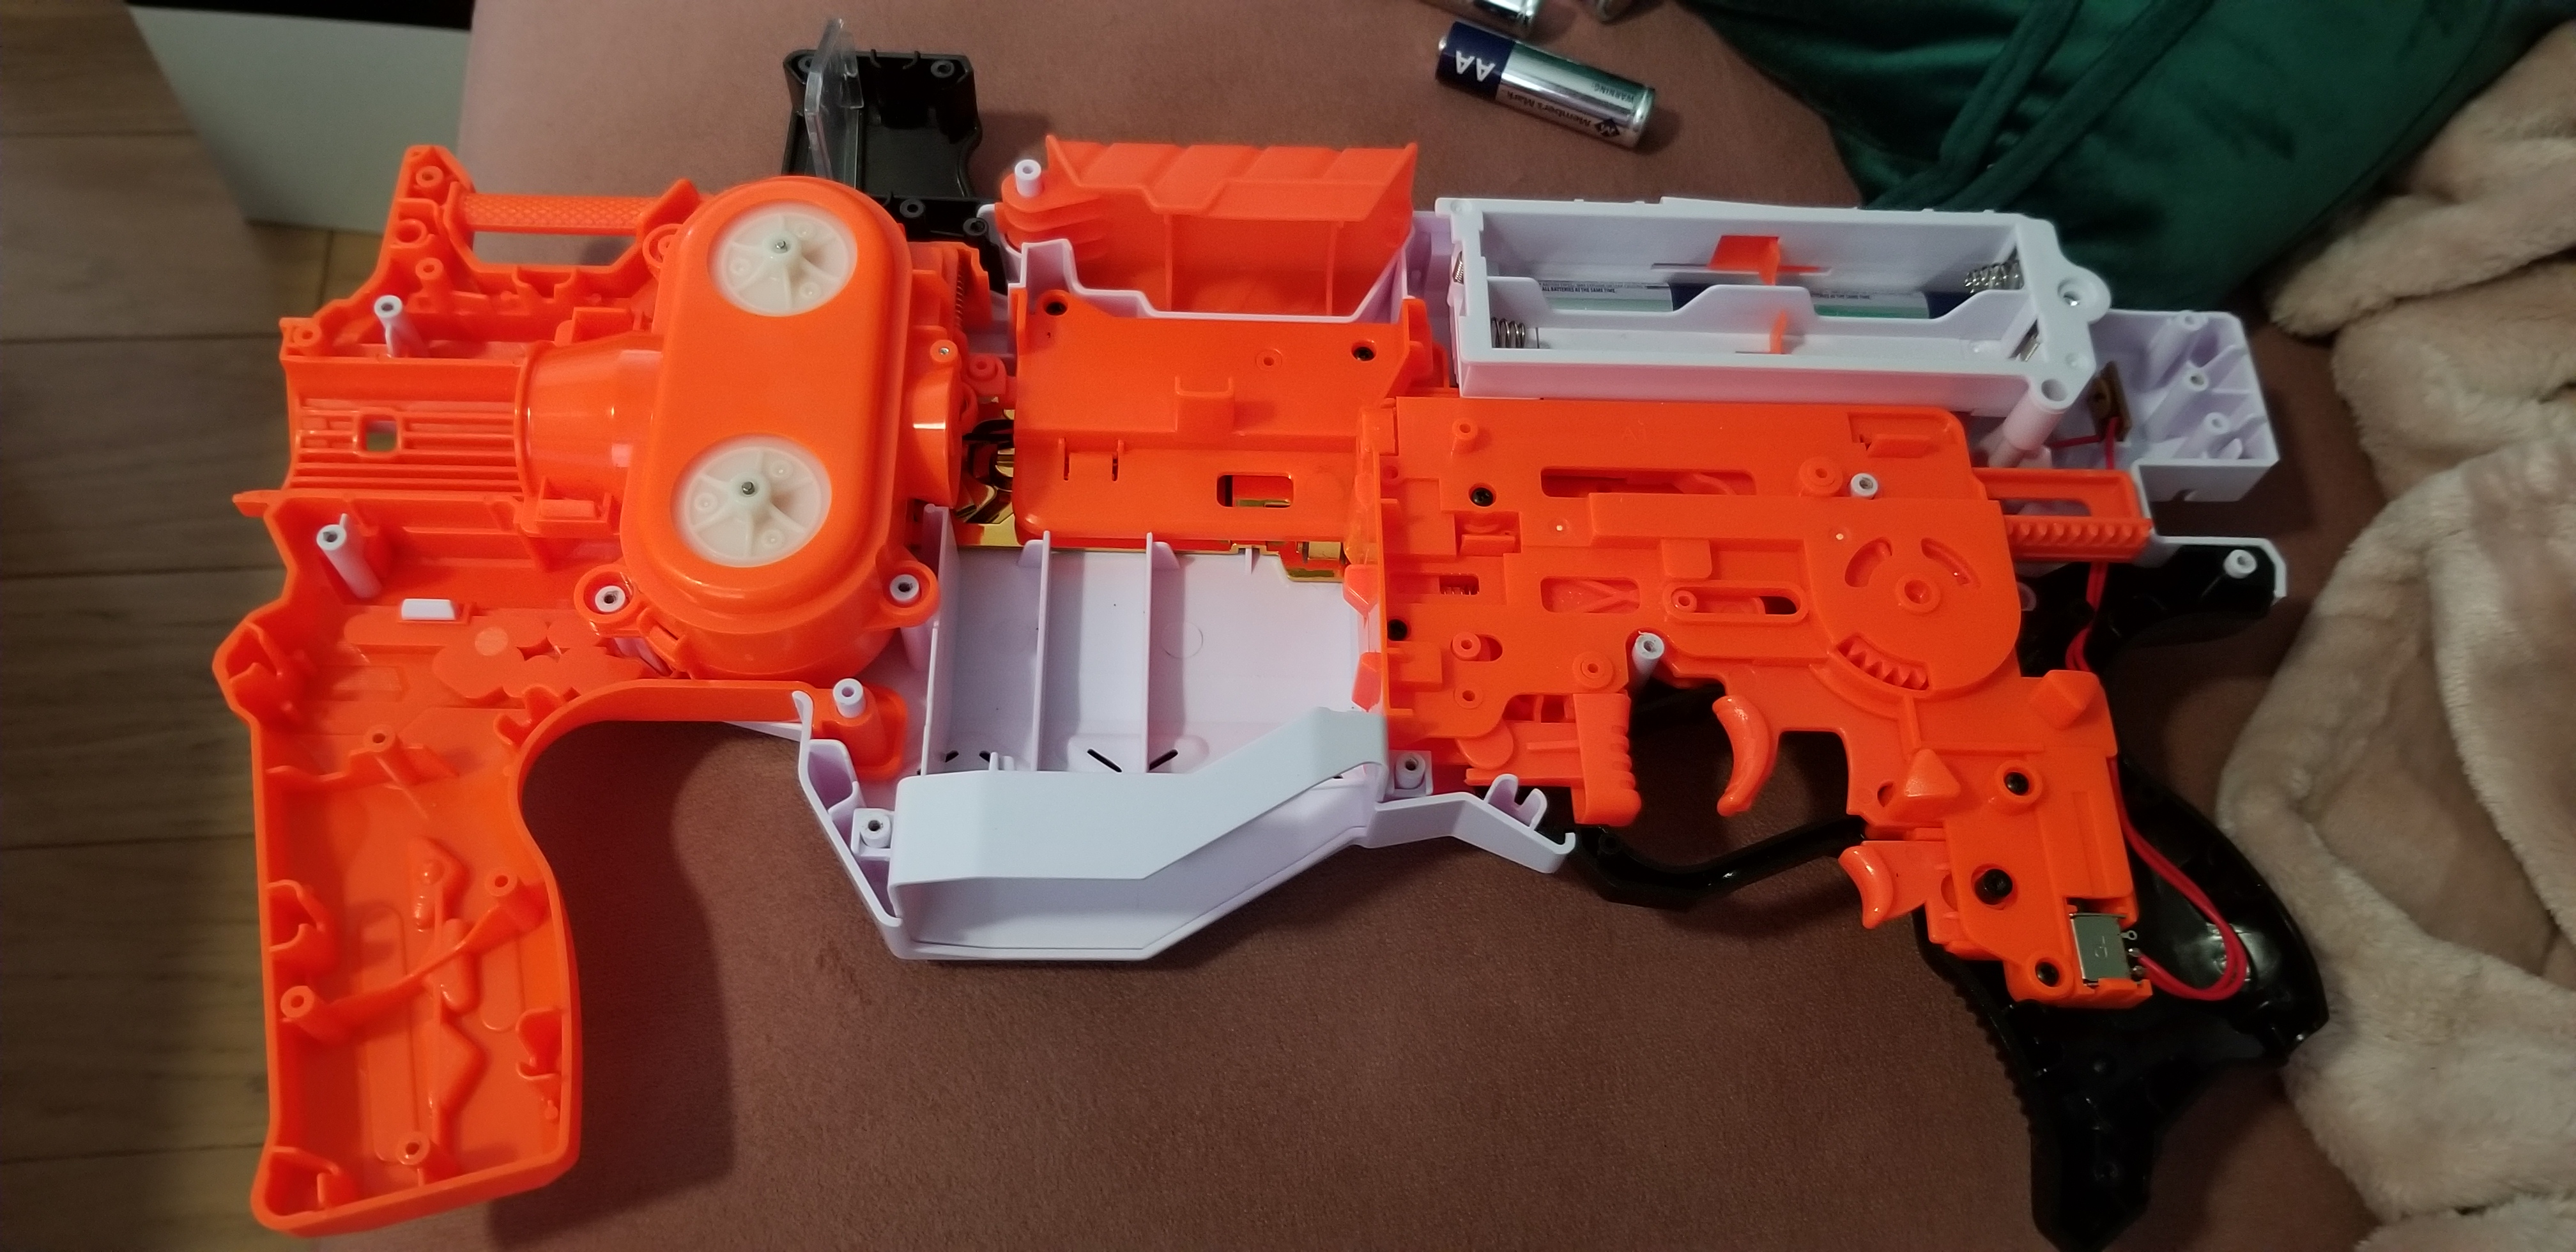 Nerf Ultra Amp Review and Mod Guide